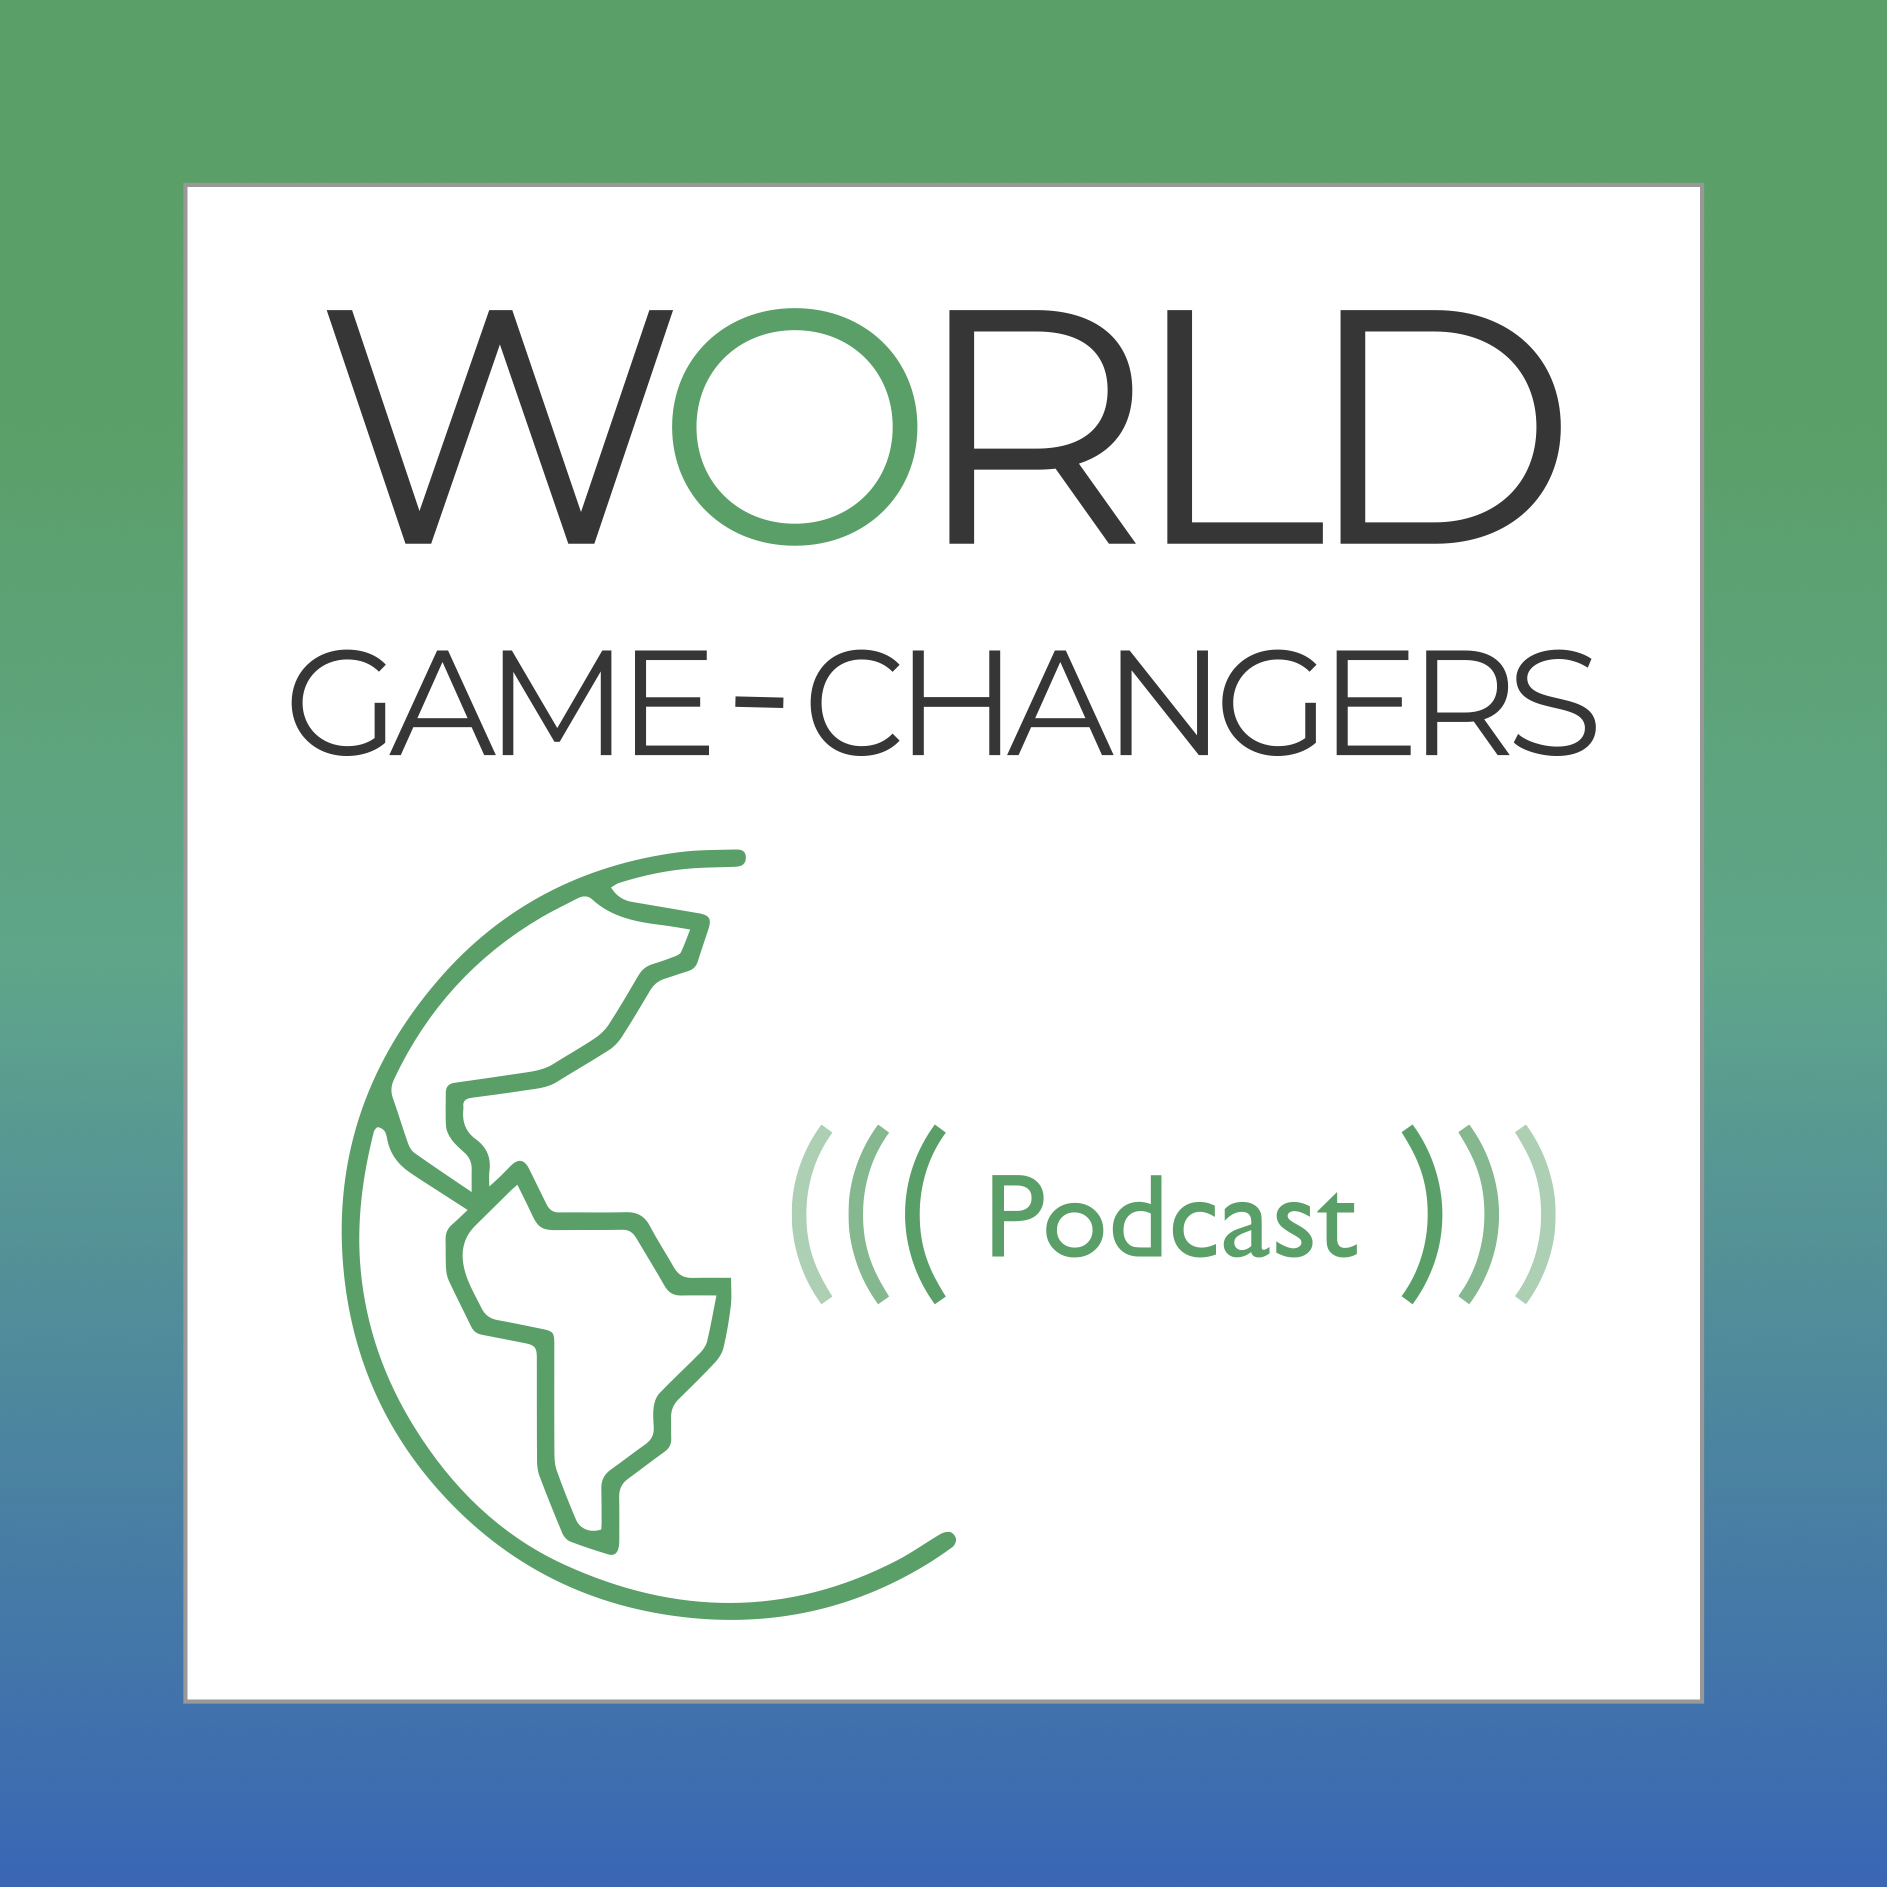 Young Game-Changers: Planting The Seeds For Change - Paul D. Lowe & Rhea Mishra